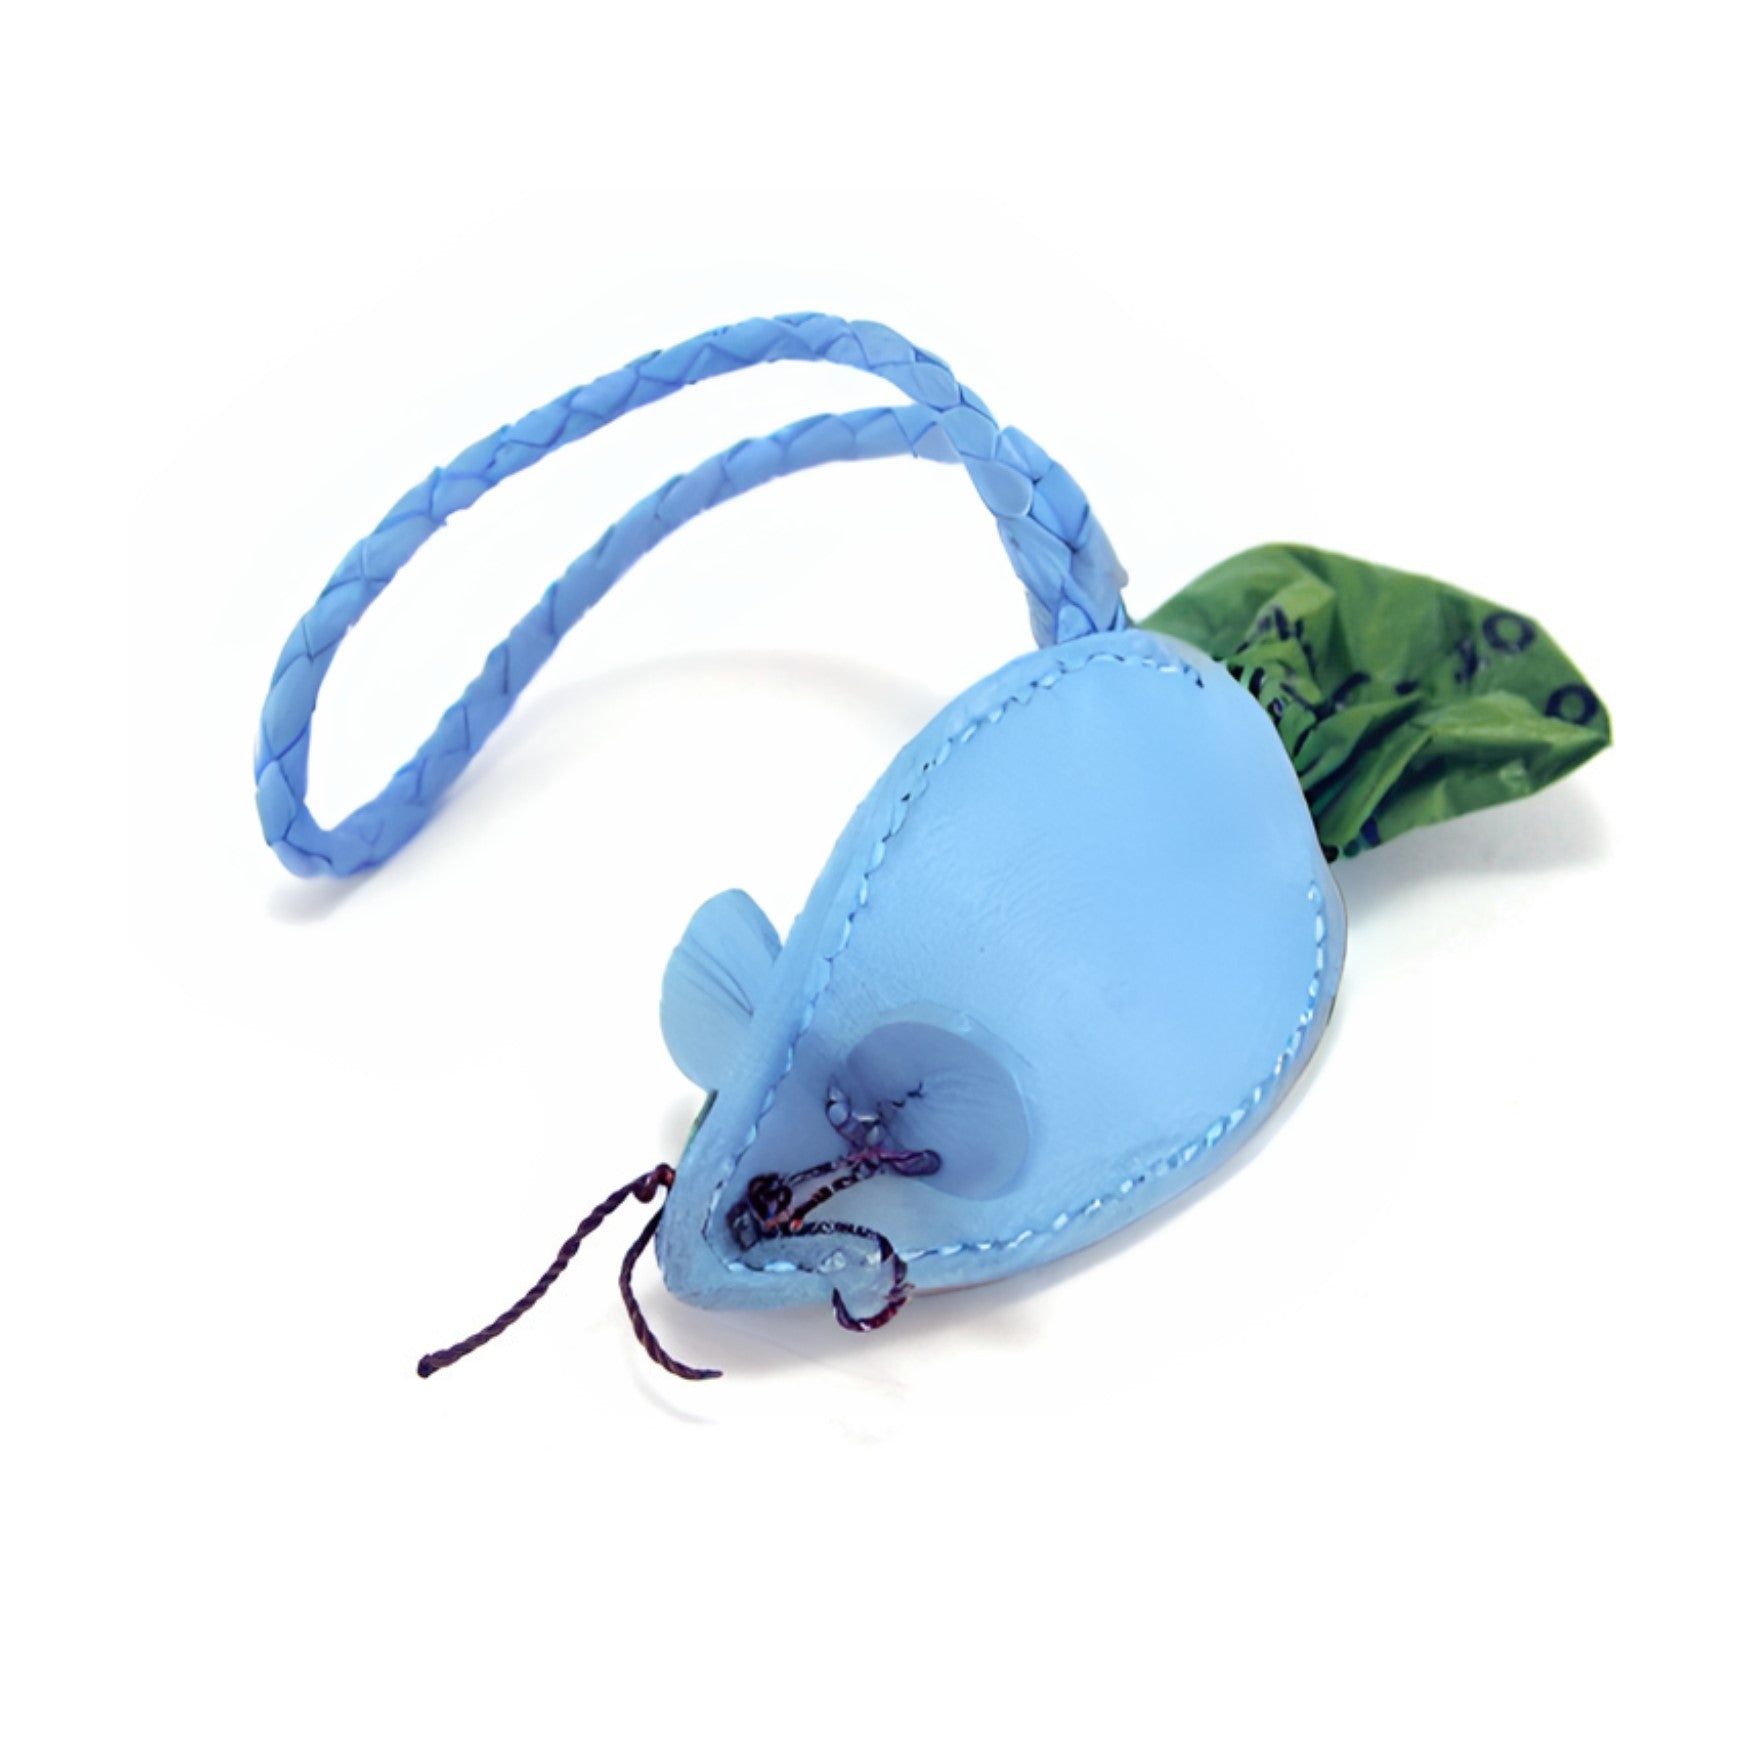 A handmade Georgie Paws blue buffalo leather fish-shaped keychain with a green fabric tail and intricate stitching, isolated on a white background.